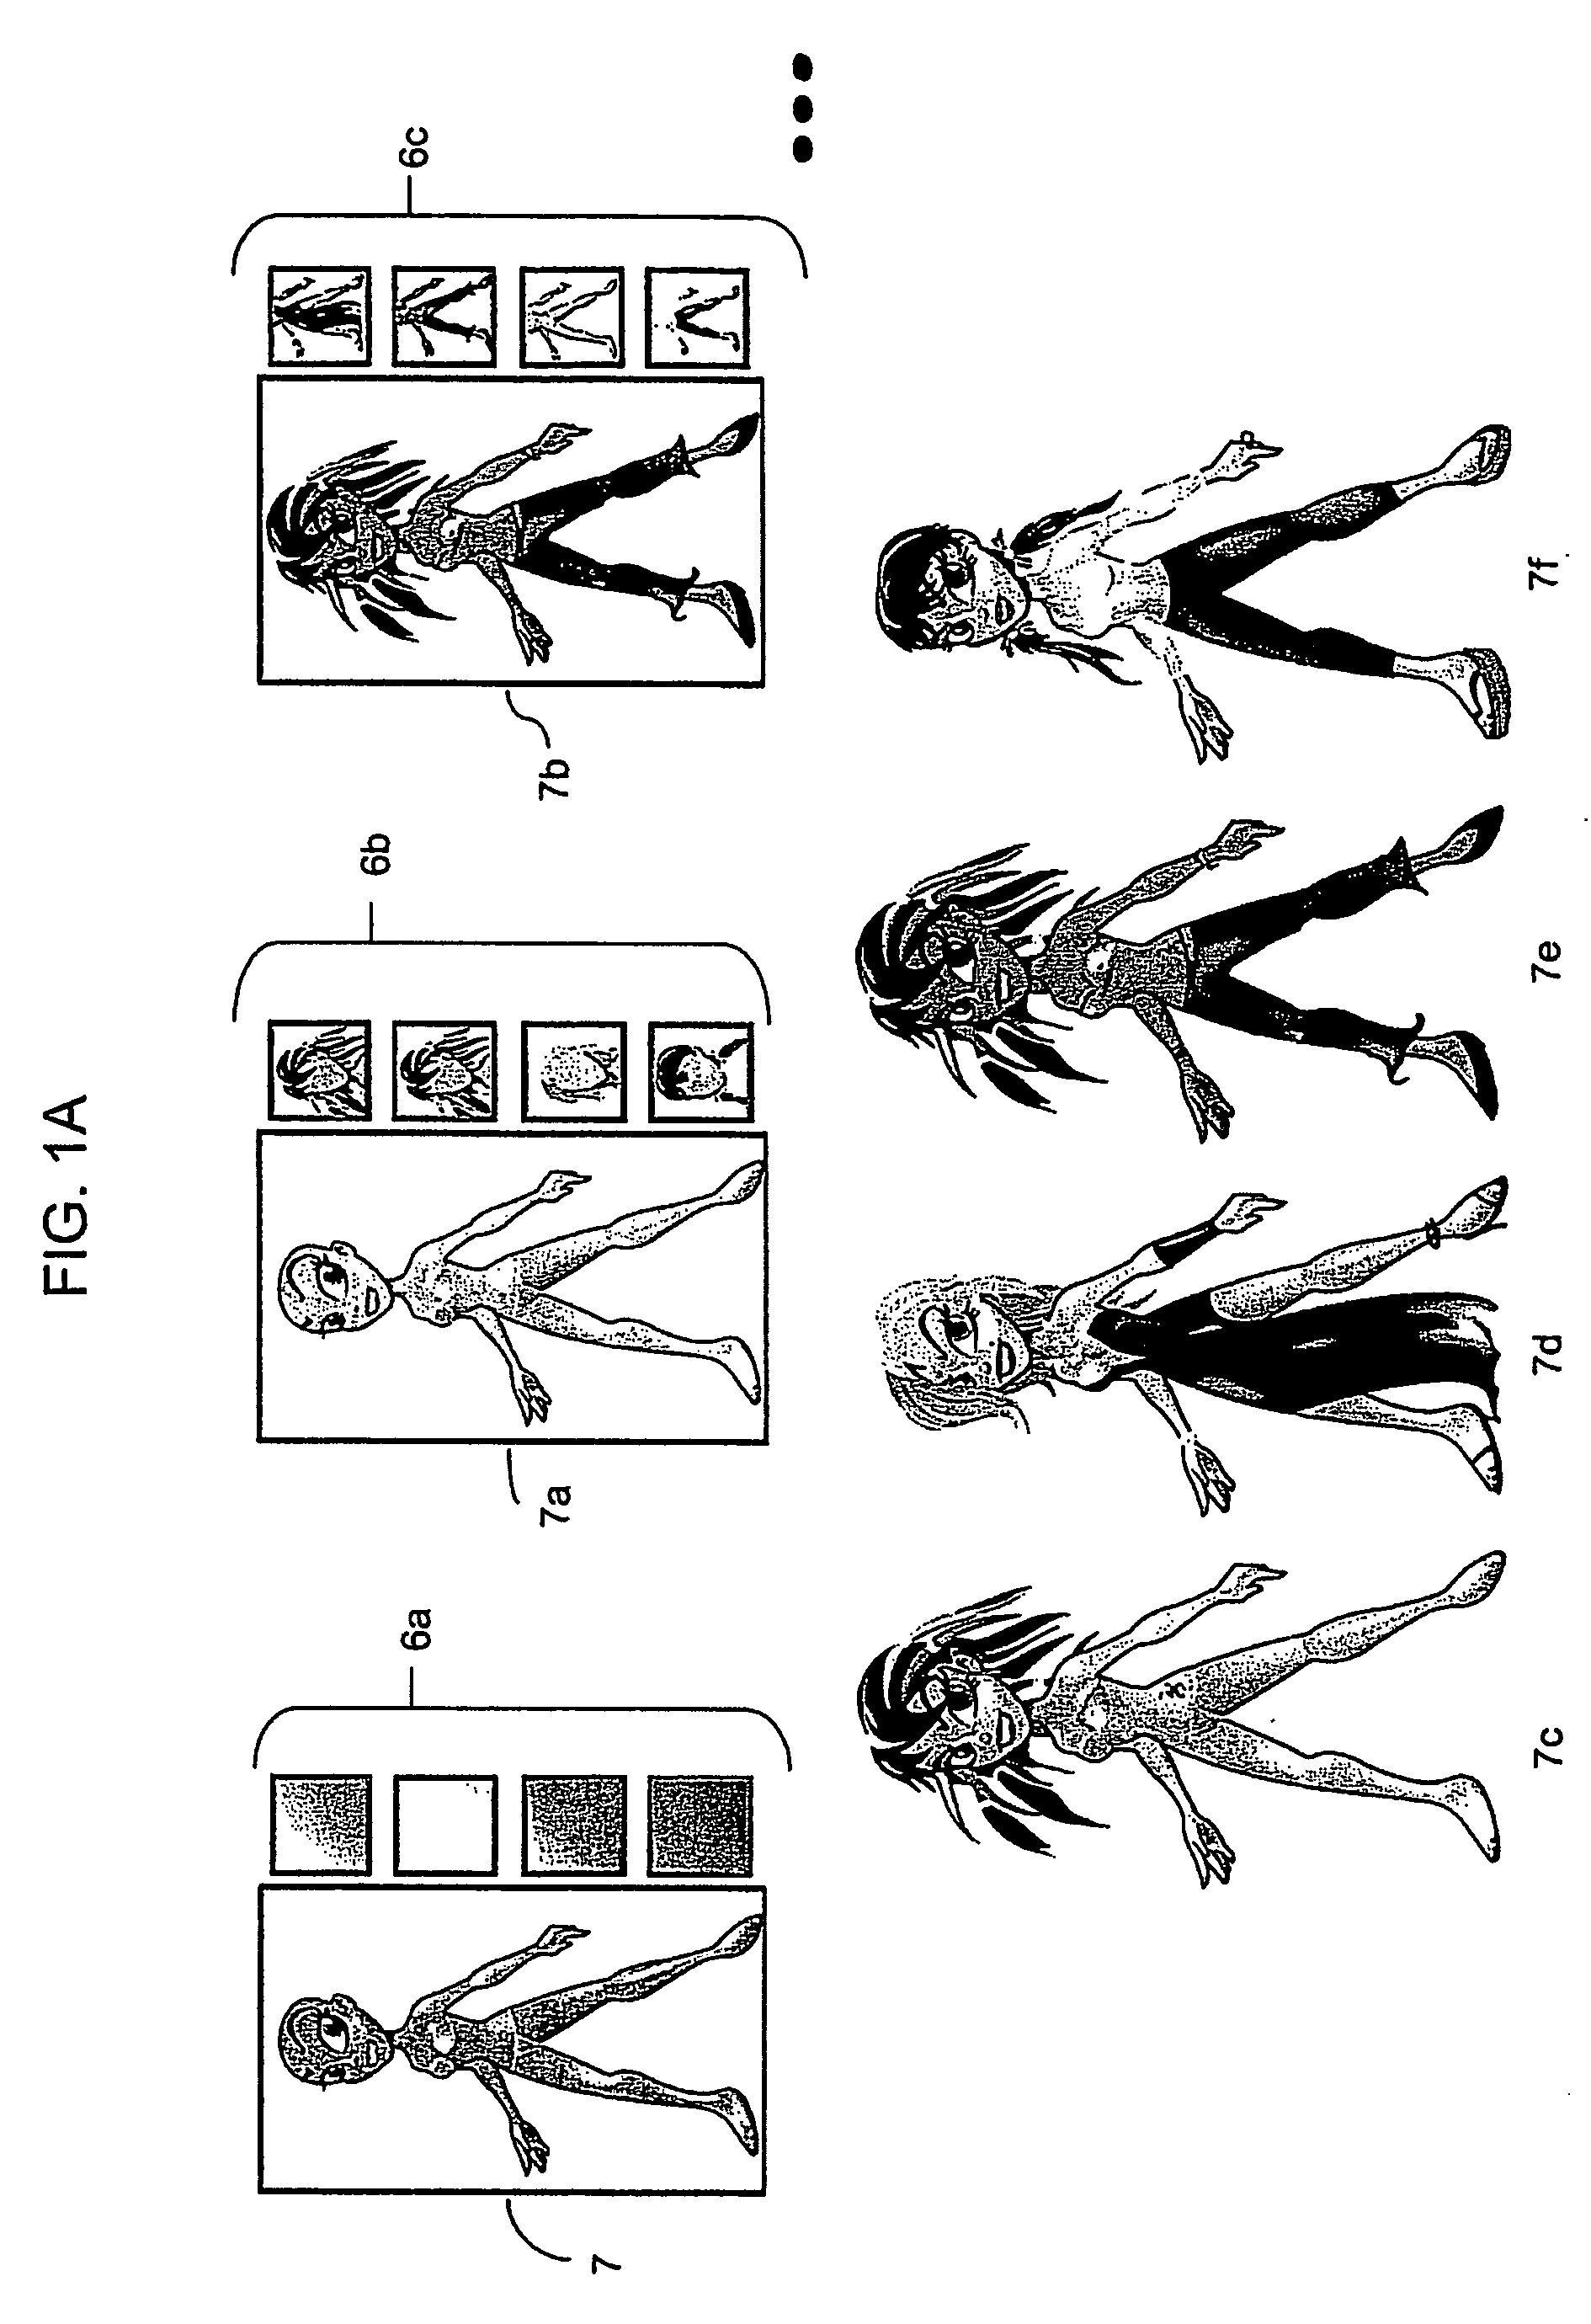 Method and system for creating and distributing mobile avatars